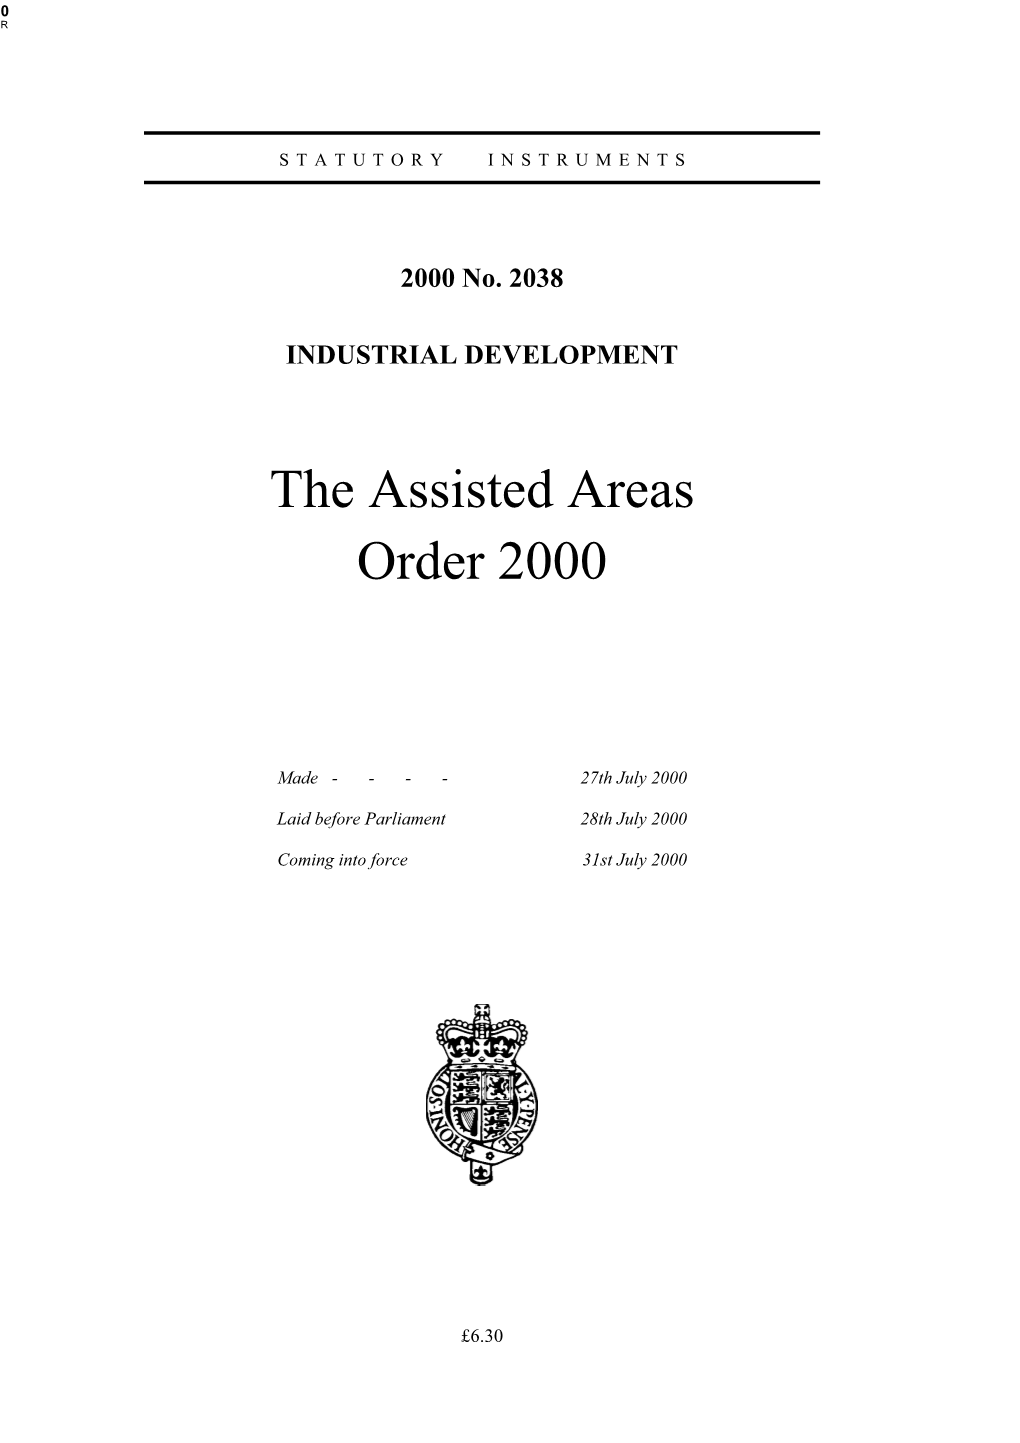 The Assisted Areas Order 2000